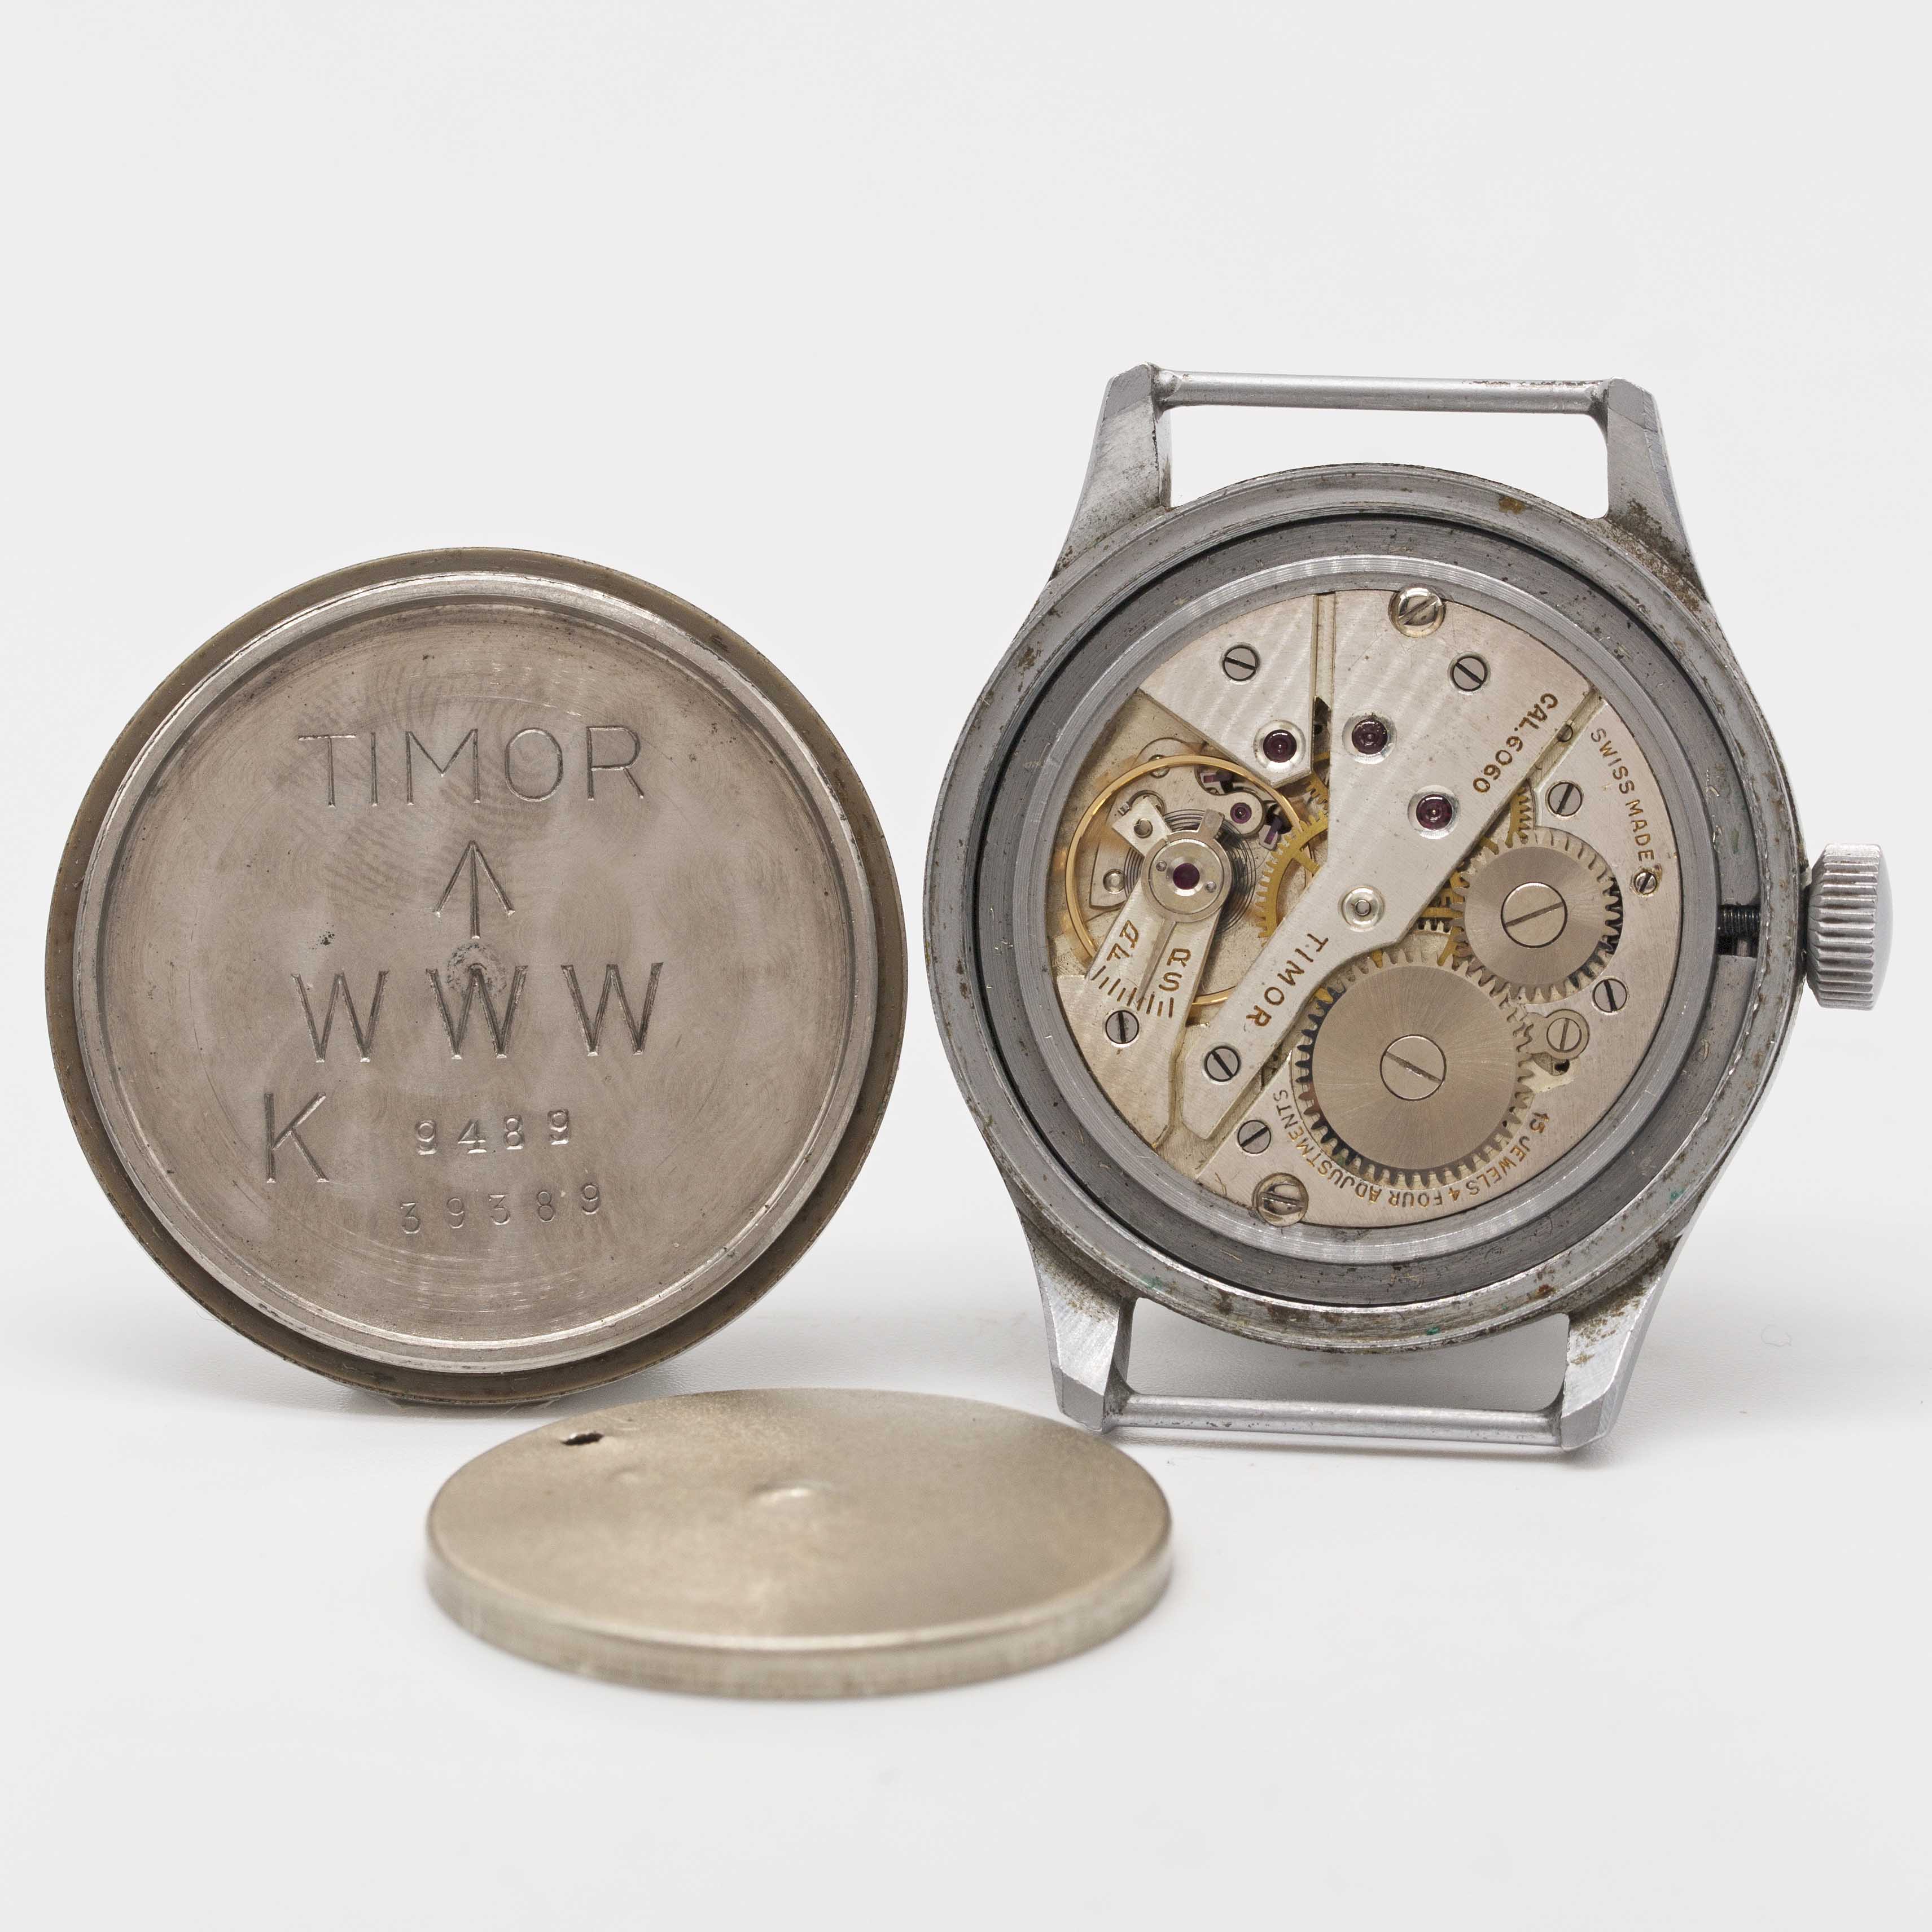 A GENTLEMAN'S STAINLESS STEEL BRITISH MILITARY TIMOR W.W.W. WRIST WATCH CIRCA 1940s, PART OF THE " - Image 6 of 6